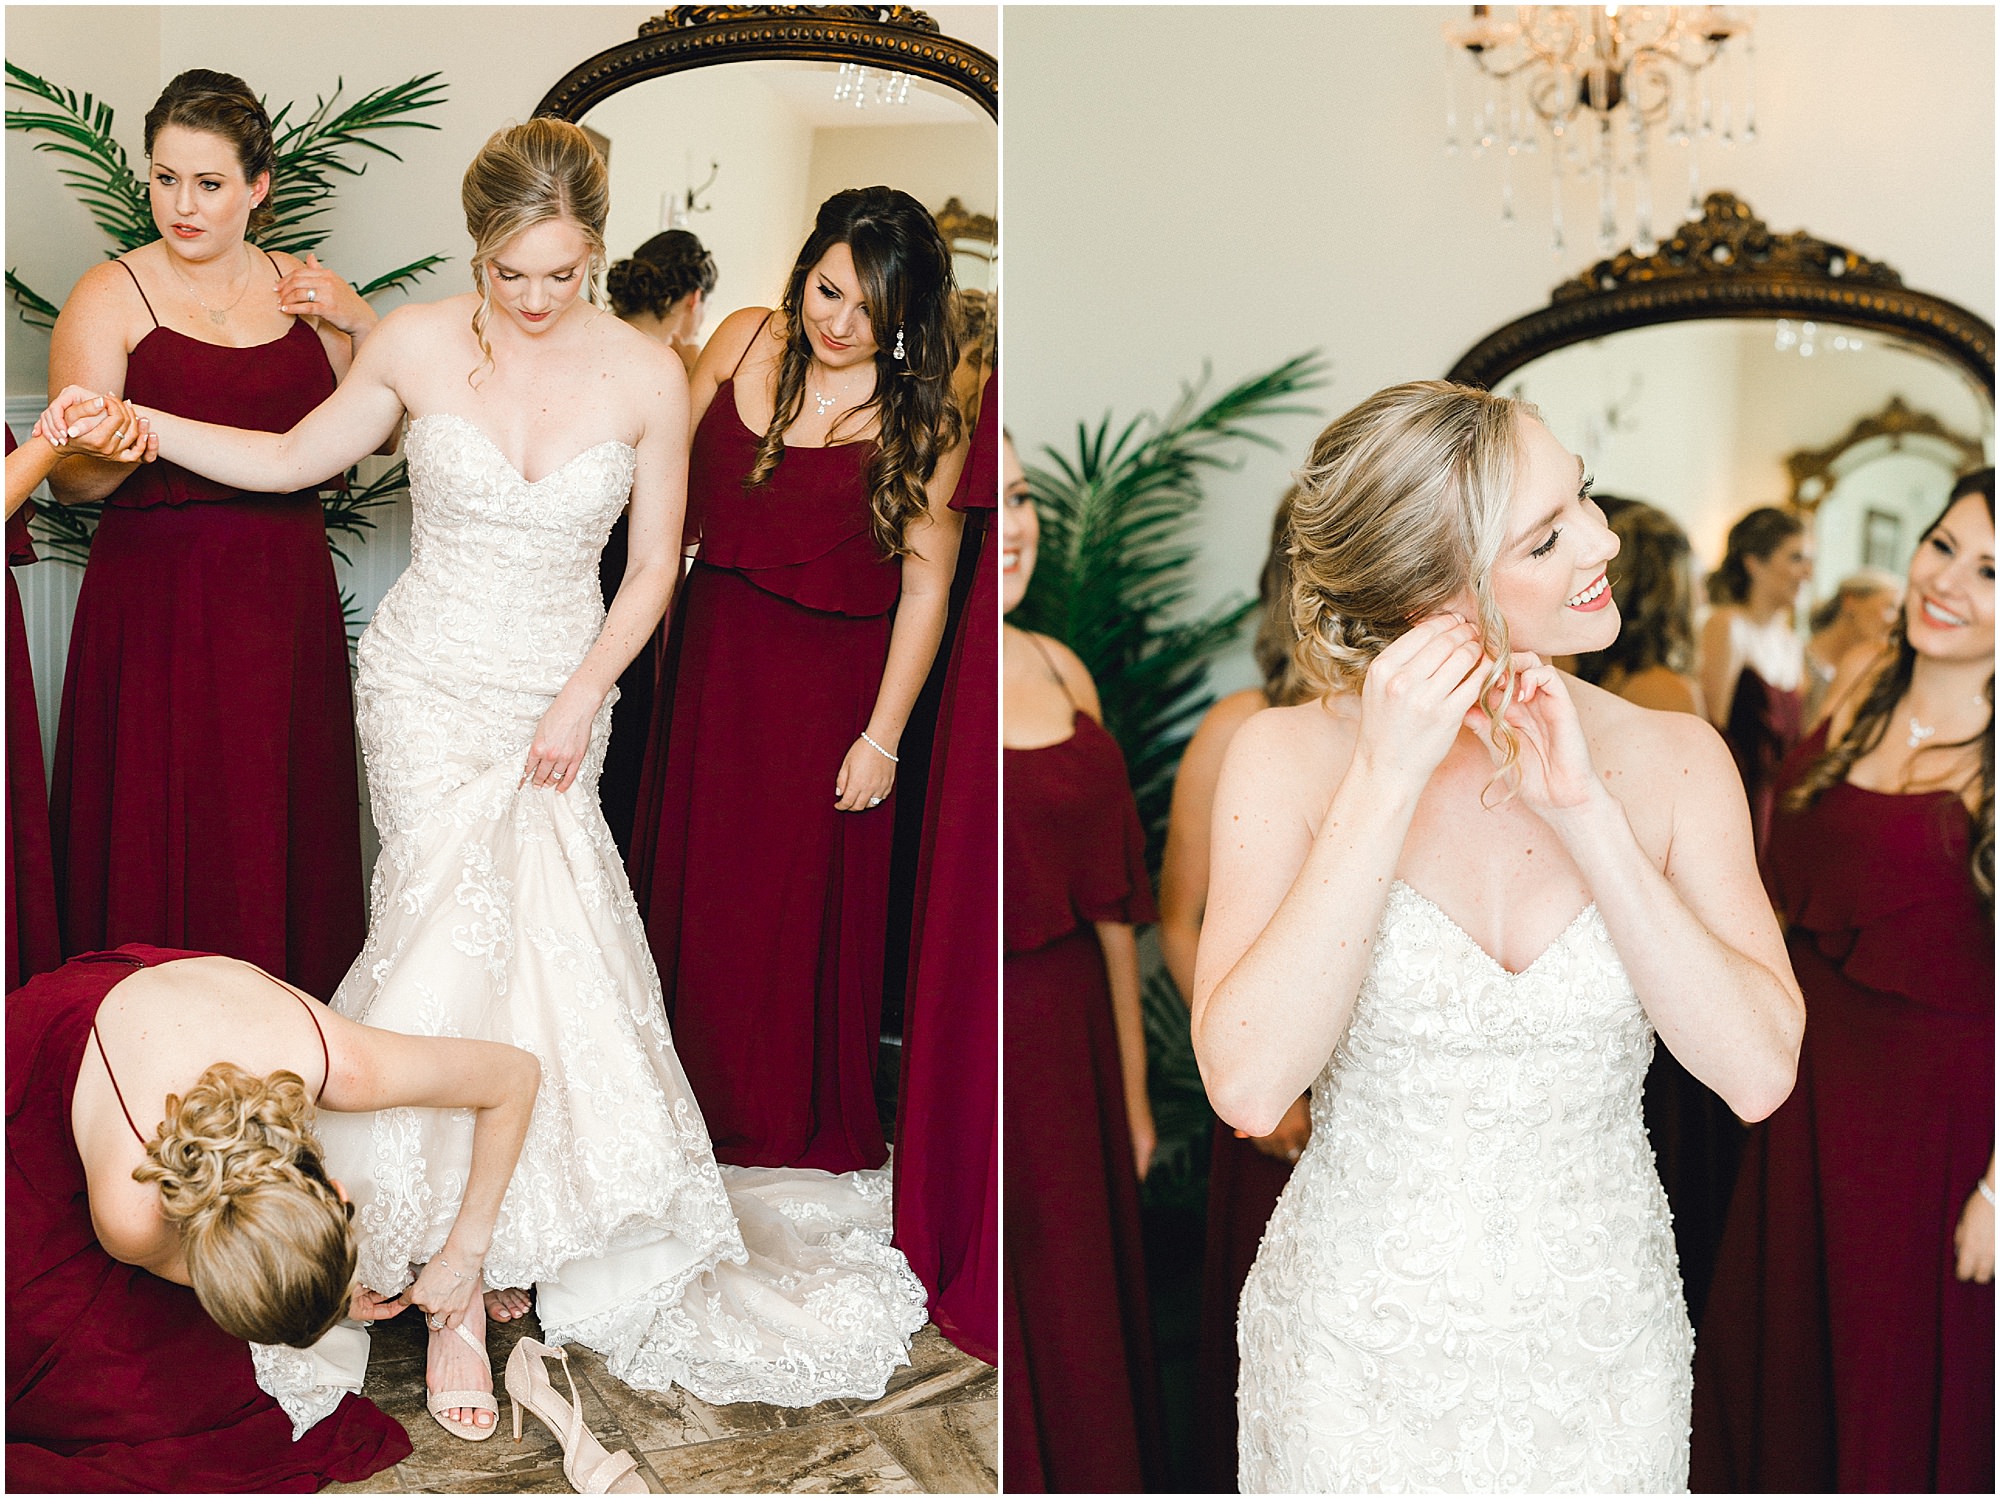 Bridesmaids helping the bride into her shoes and watching as she puts on her earrings